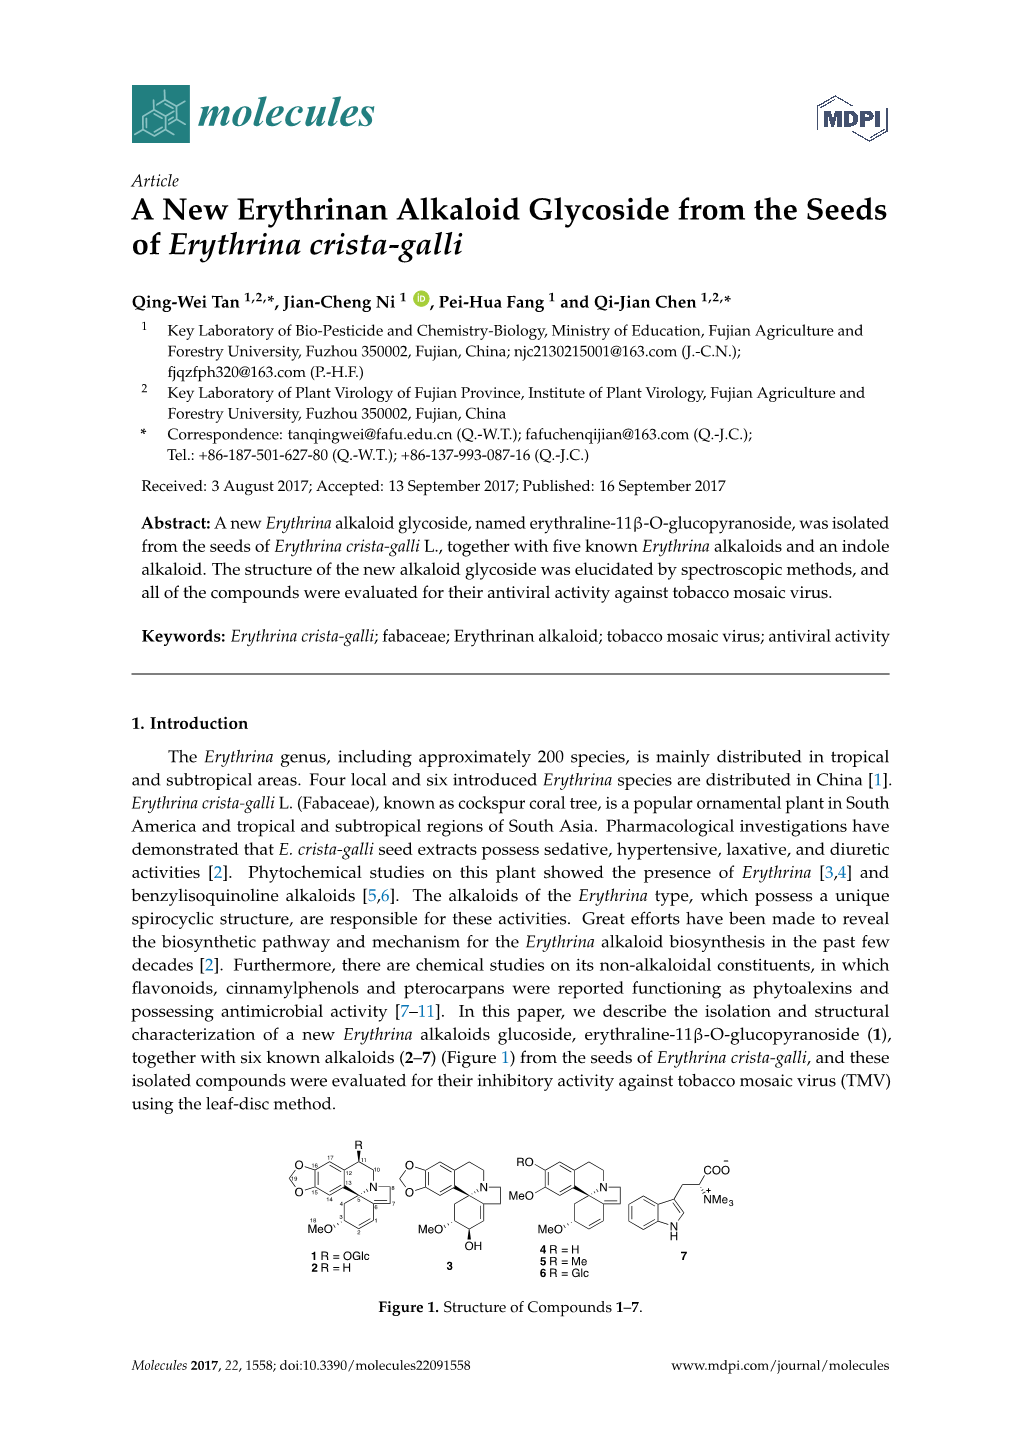 A New Erythrinan Alkaloid Glycoside from the Seeds of Erythrina Crista-Galli